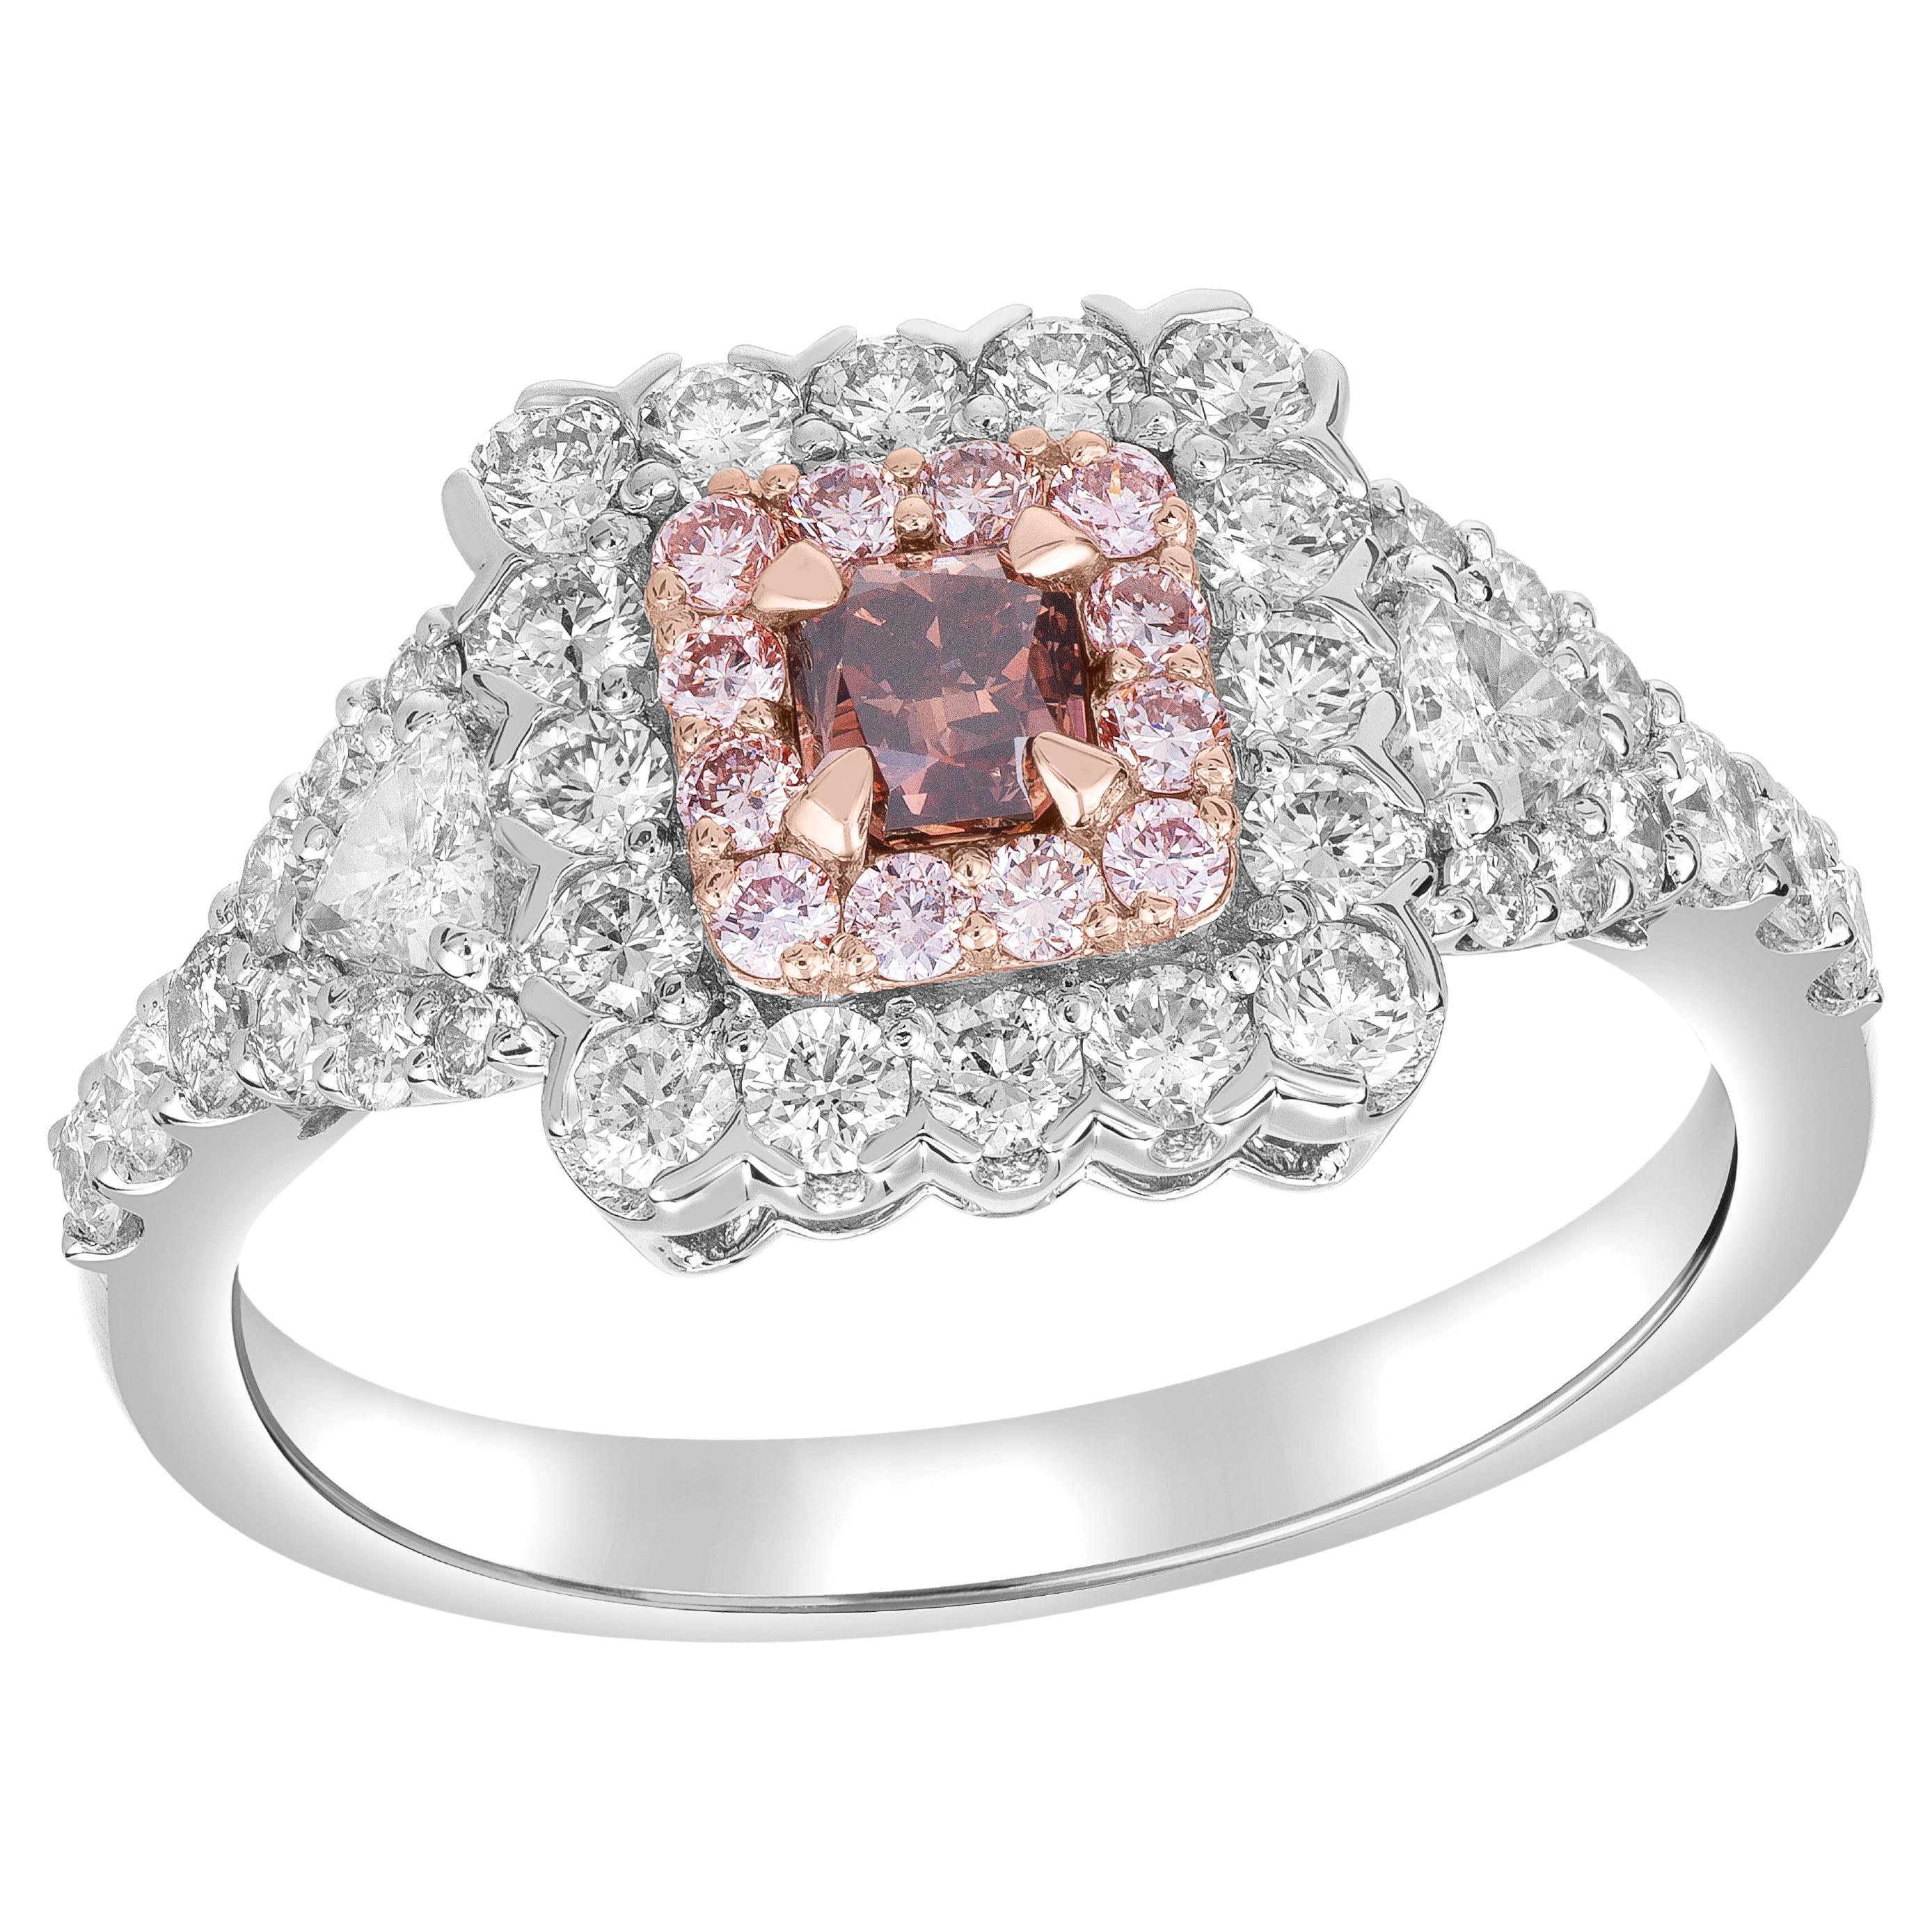 Fancy Orangy Brown Diamond with Pink Diamond Halo Engagemen Ring Set in 18k Gold For Sale